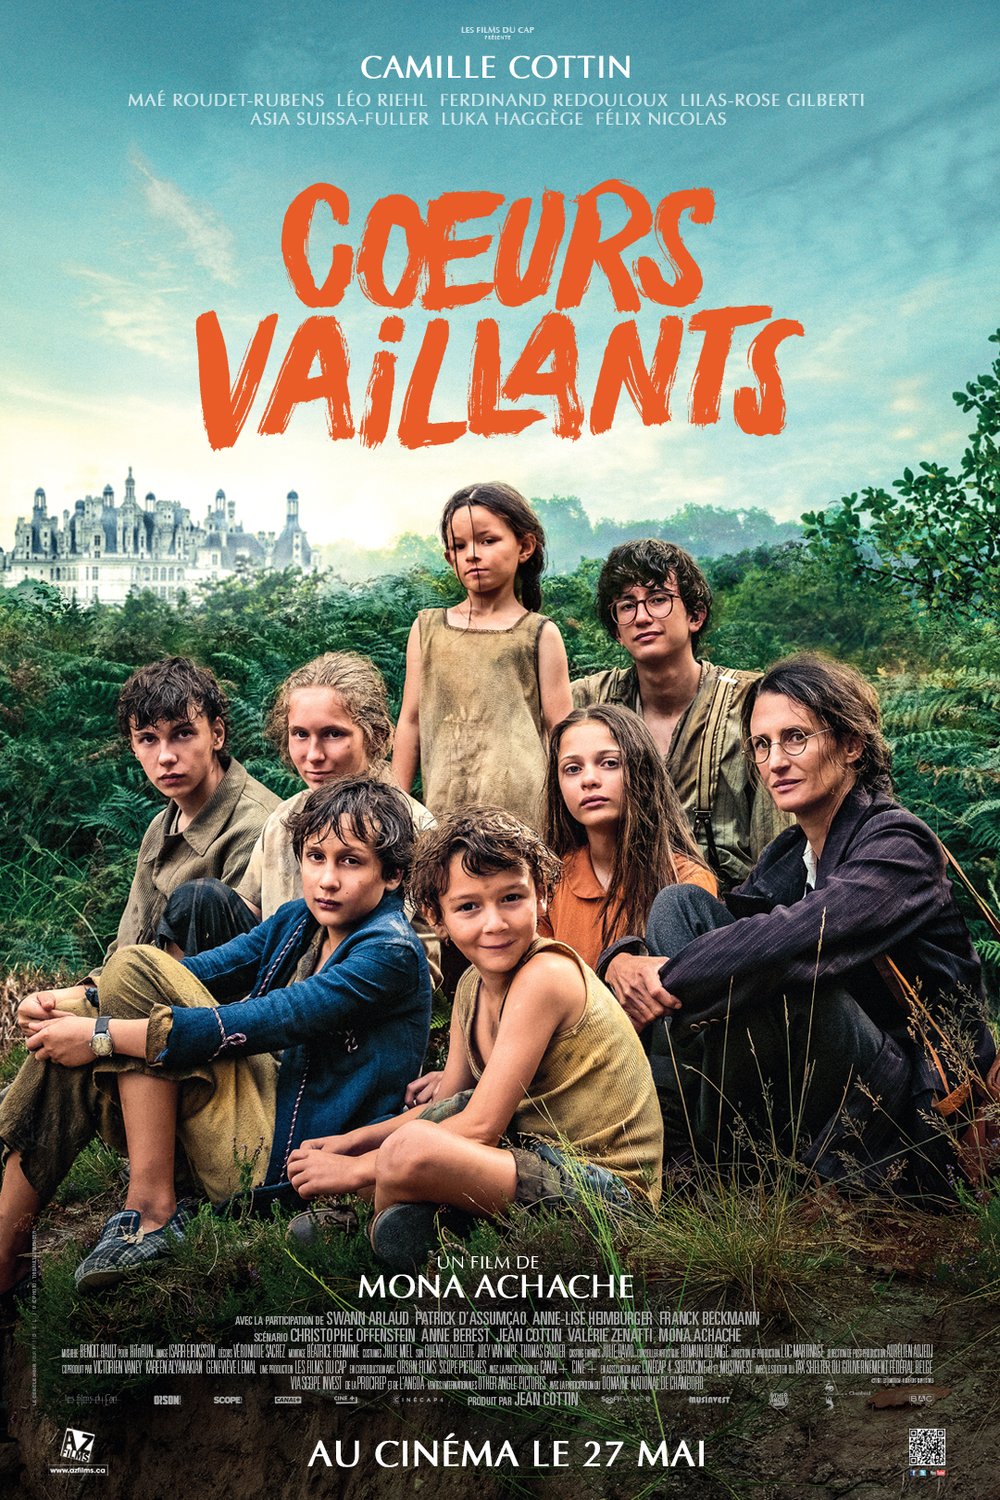 Poster of the movie Coeurs vaillants